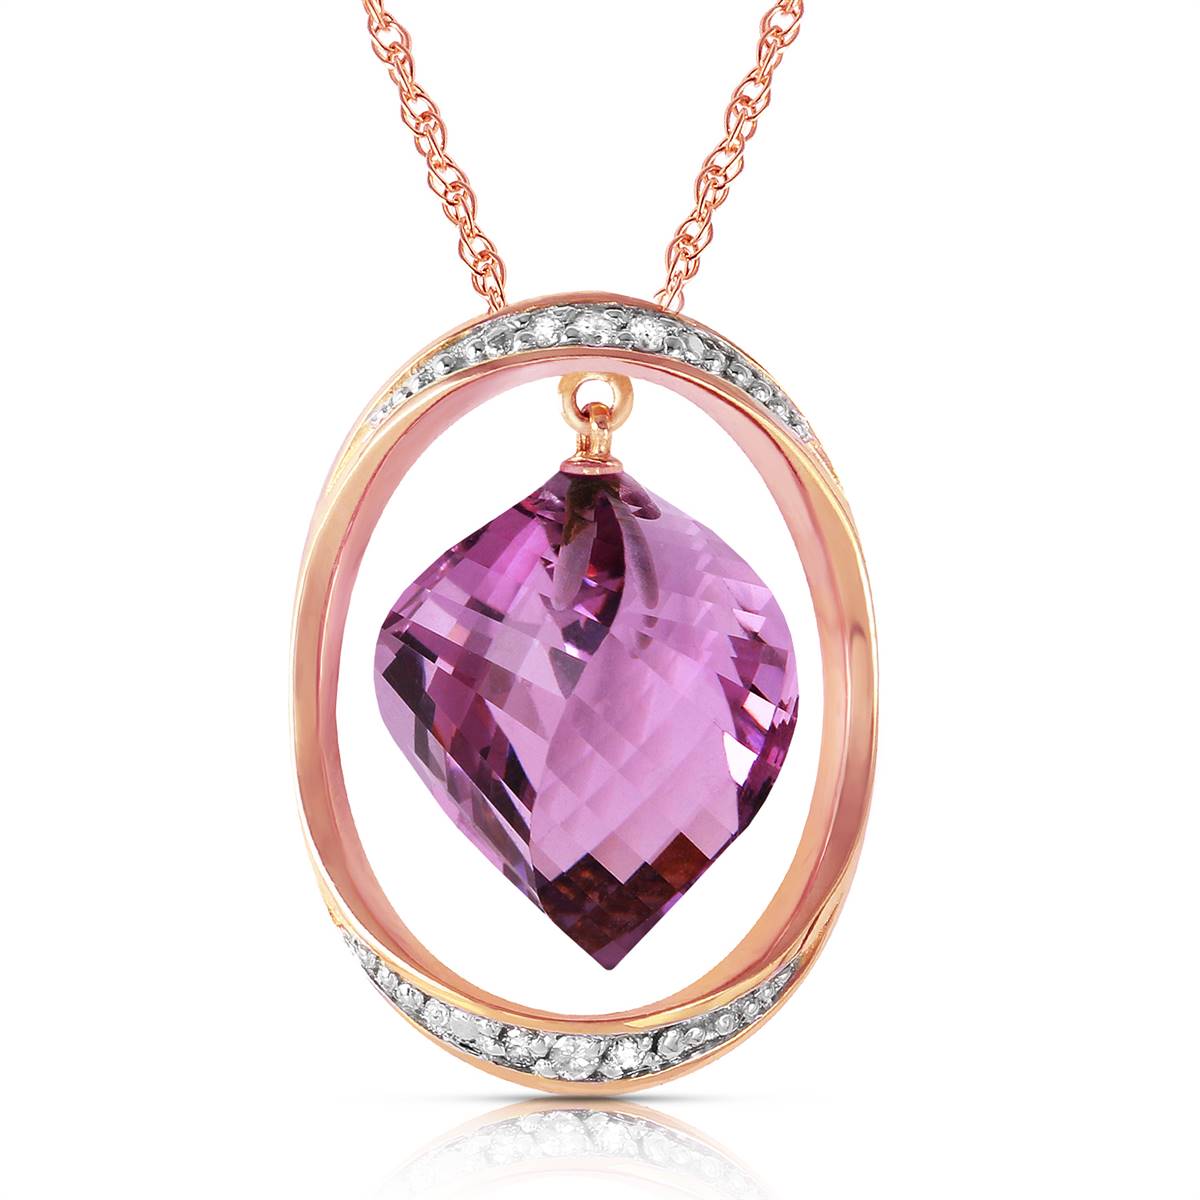 14K Solid Rose Gold Necklace w/ Natural Twisted Briolette Amethyst & Diamonds